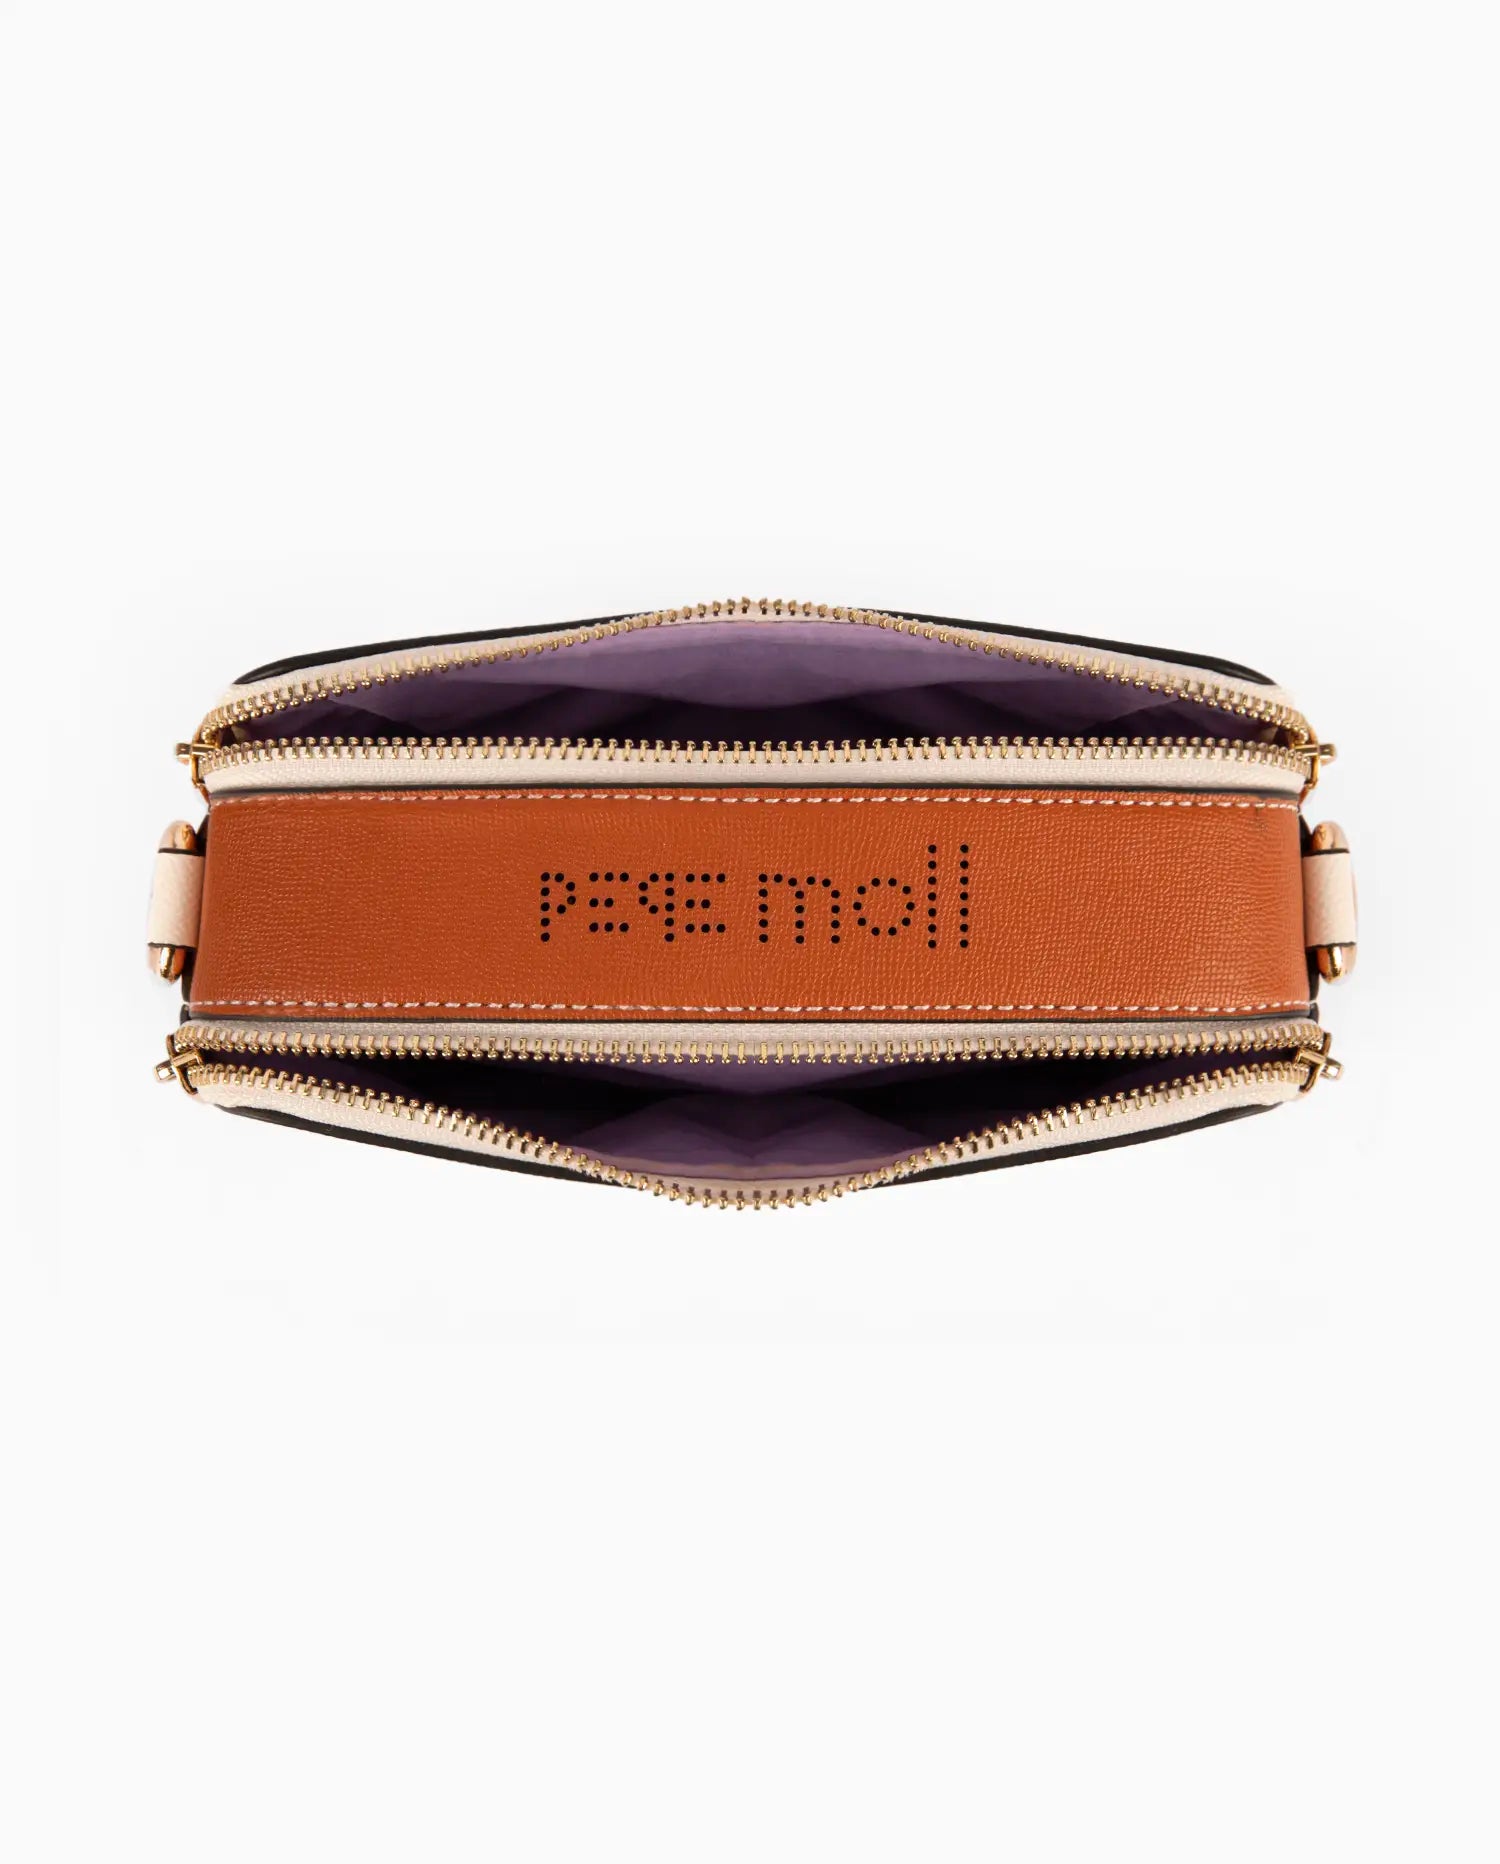  Side view of Pepe Moll Frenzy Off-Bi Crossbody Bag 241360, showing its sleek and functional design.